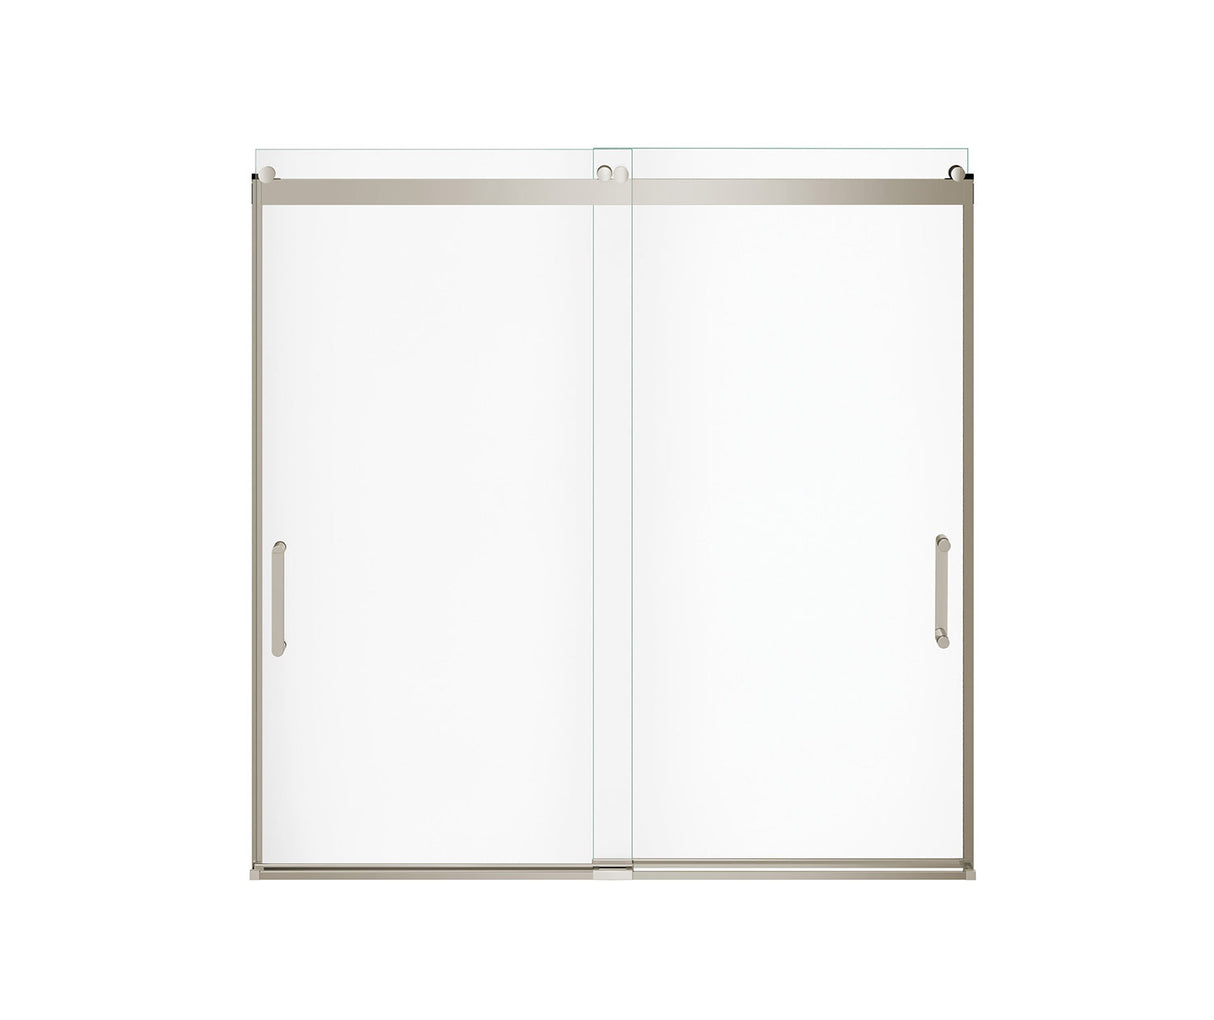 MAAX 136692-900-305-000 Revelation Round 56-59 in. x 56 ¾-59 ¼ in. 6 mm Bypass Tub Door for Alcove Installation with Clear glass in Brushed Nickel